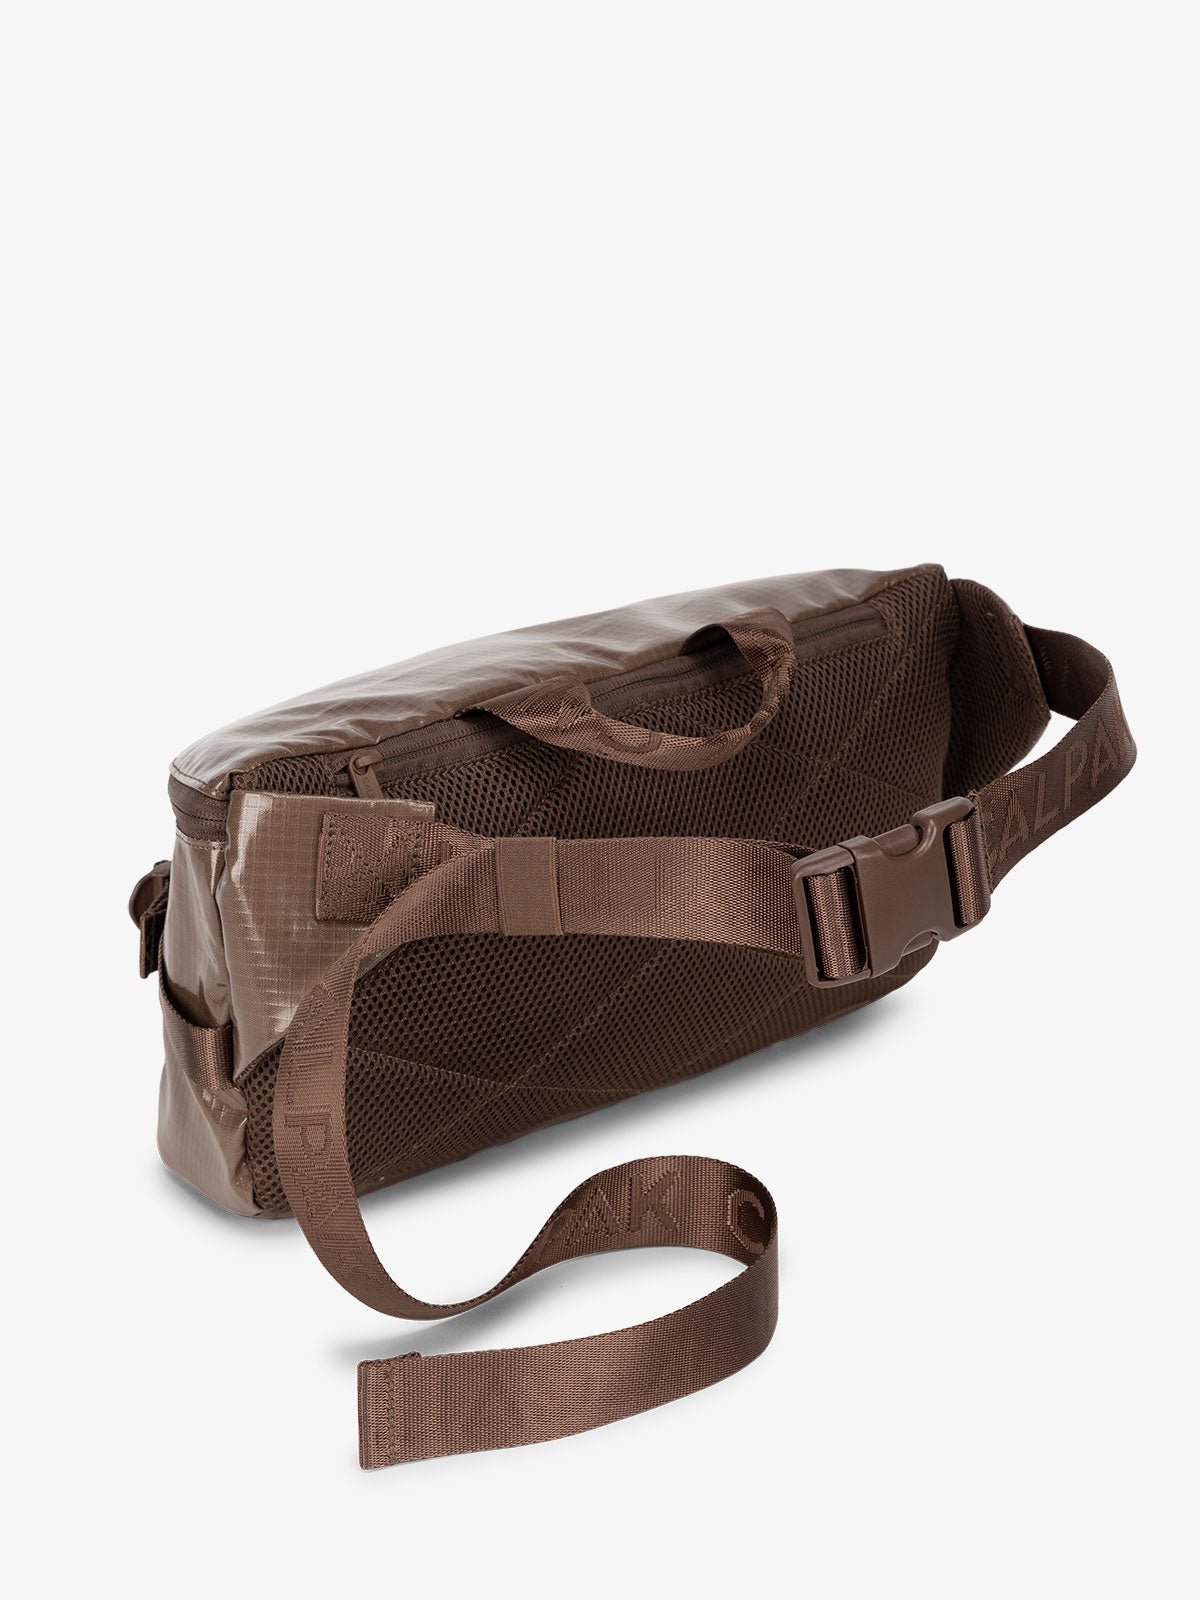 CALPAK Terra Sling Bag for women with adjustable crossbody strap and top handle in cacao brown